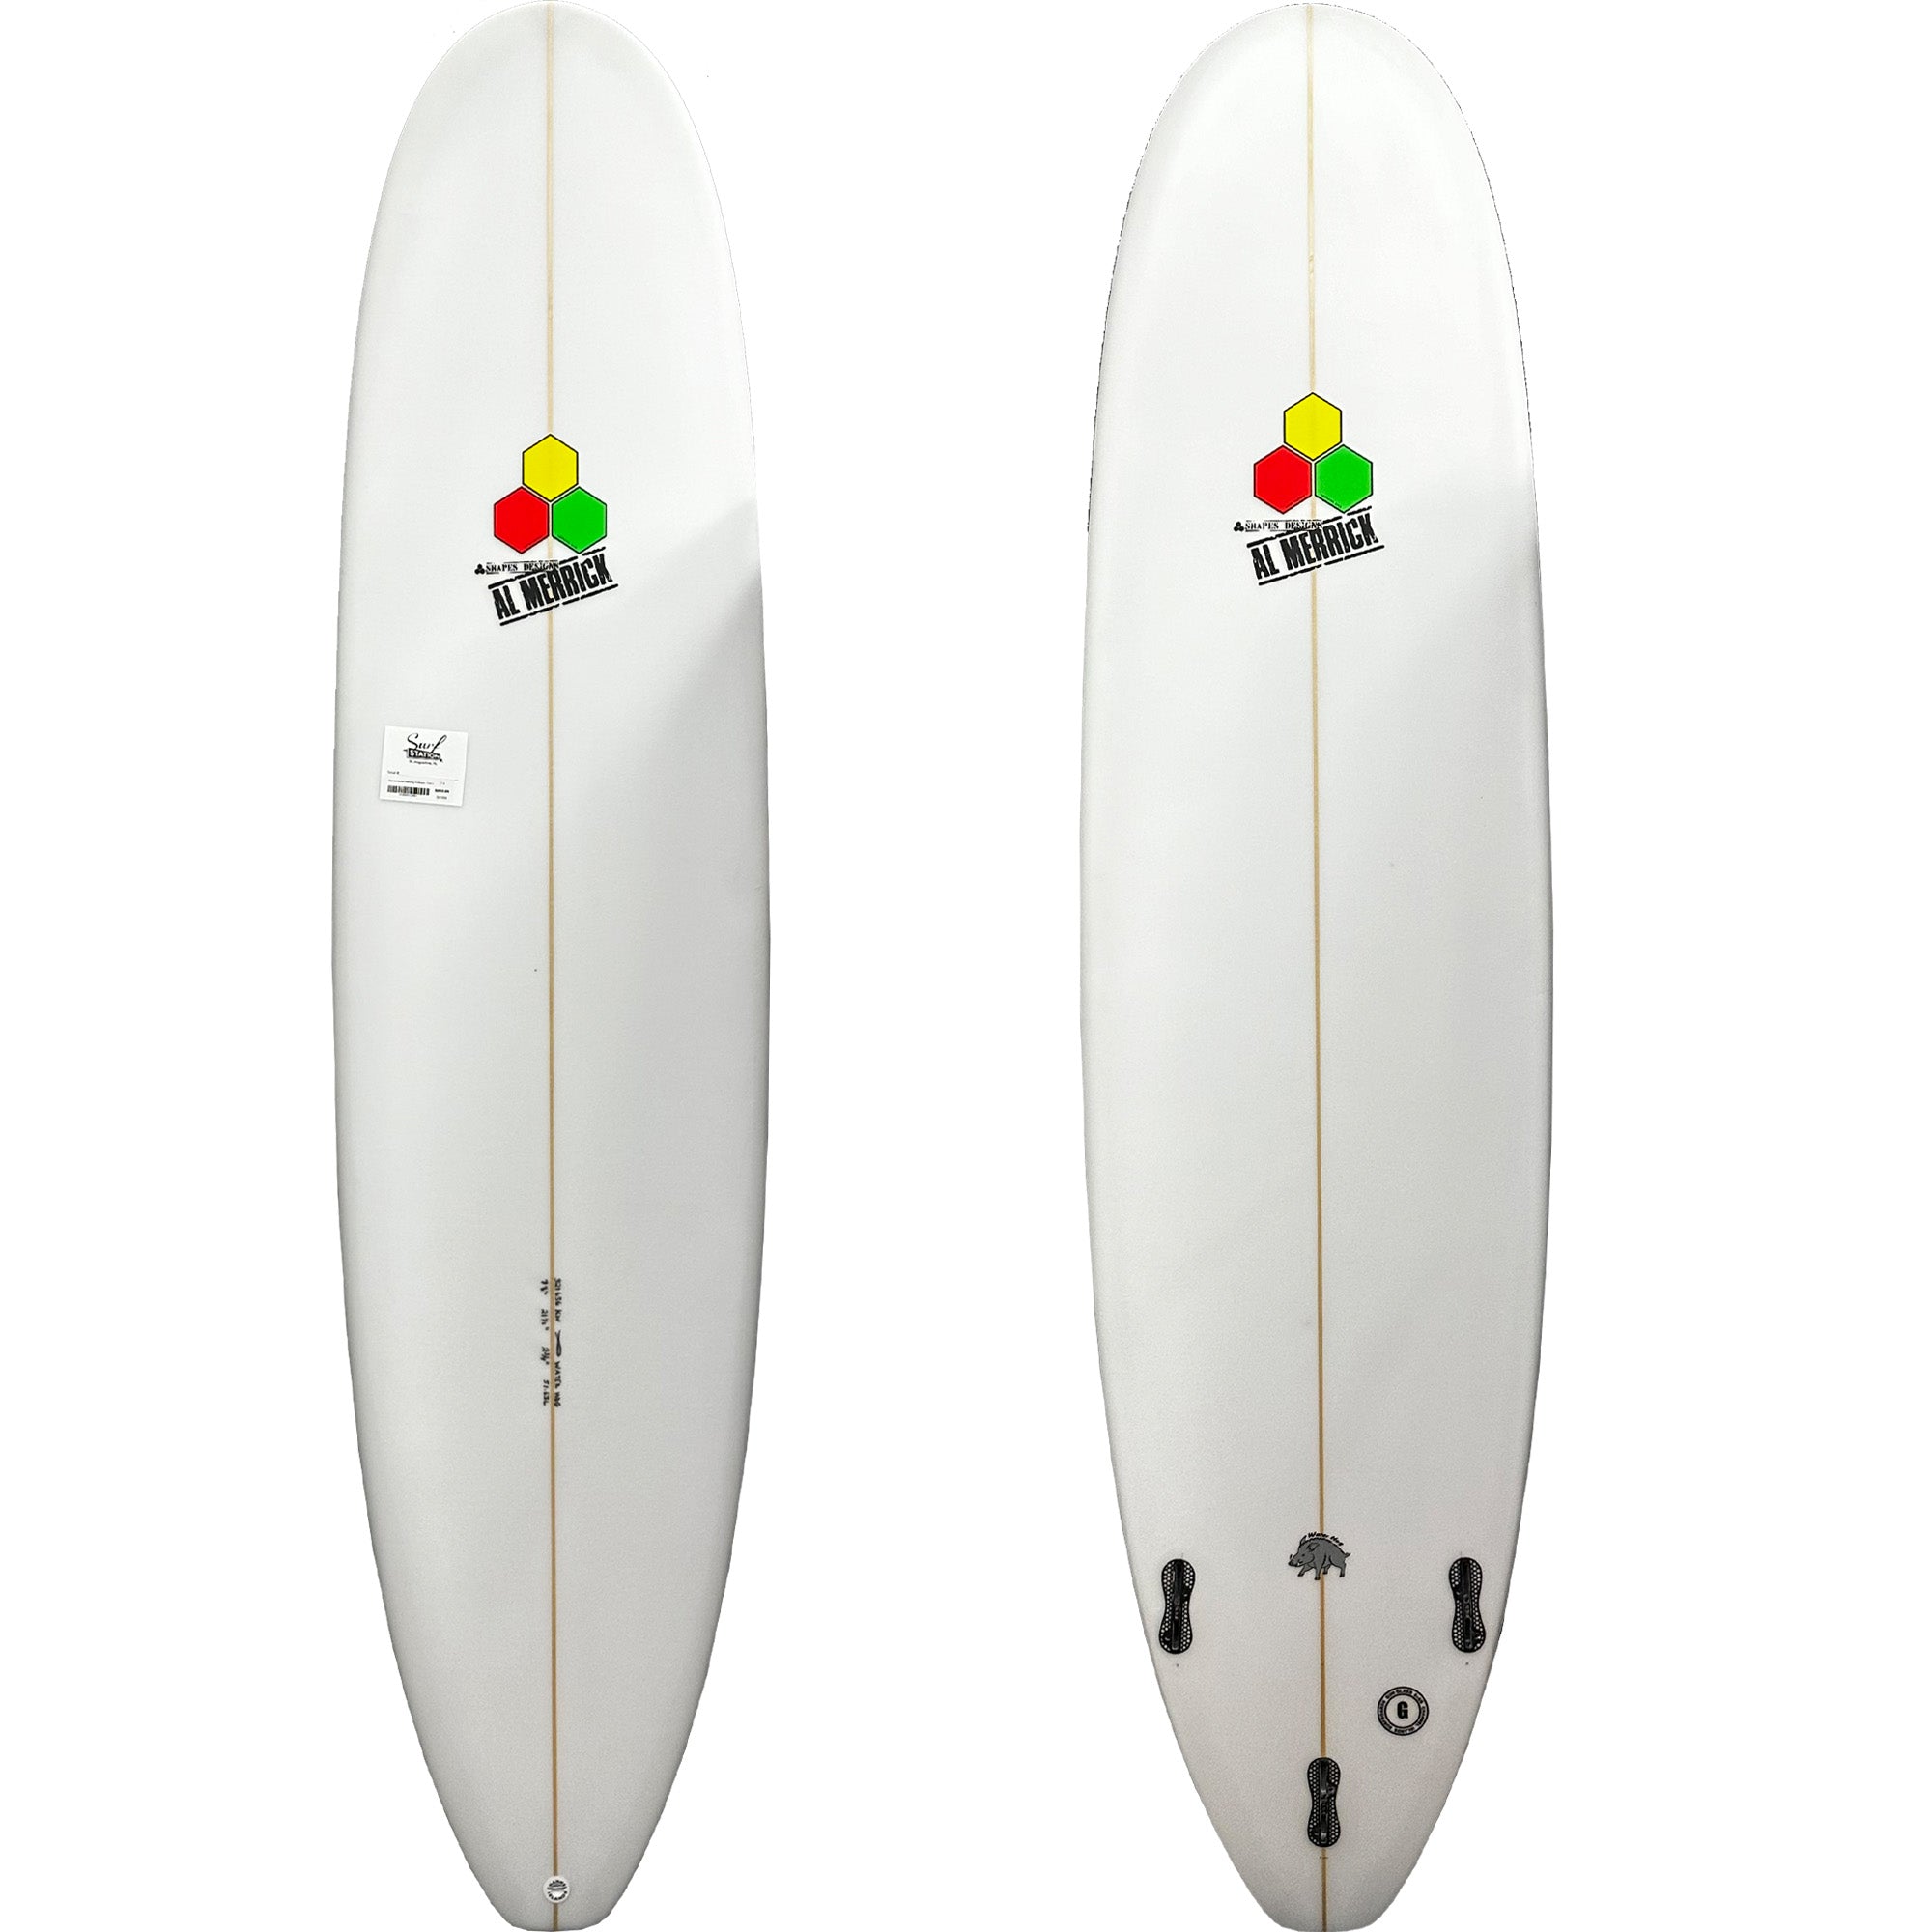 The Water Hog – Channel Islands Surfboards